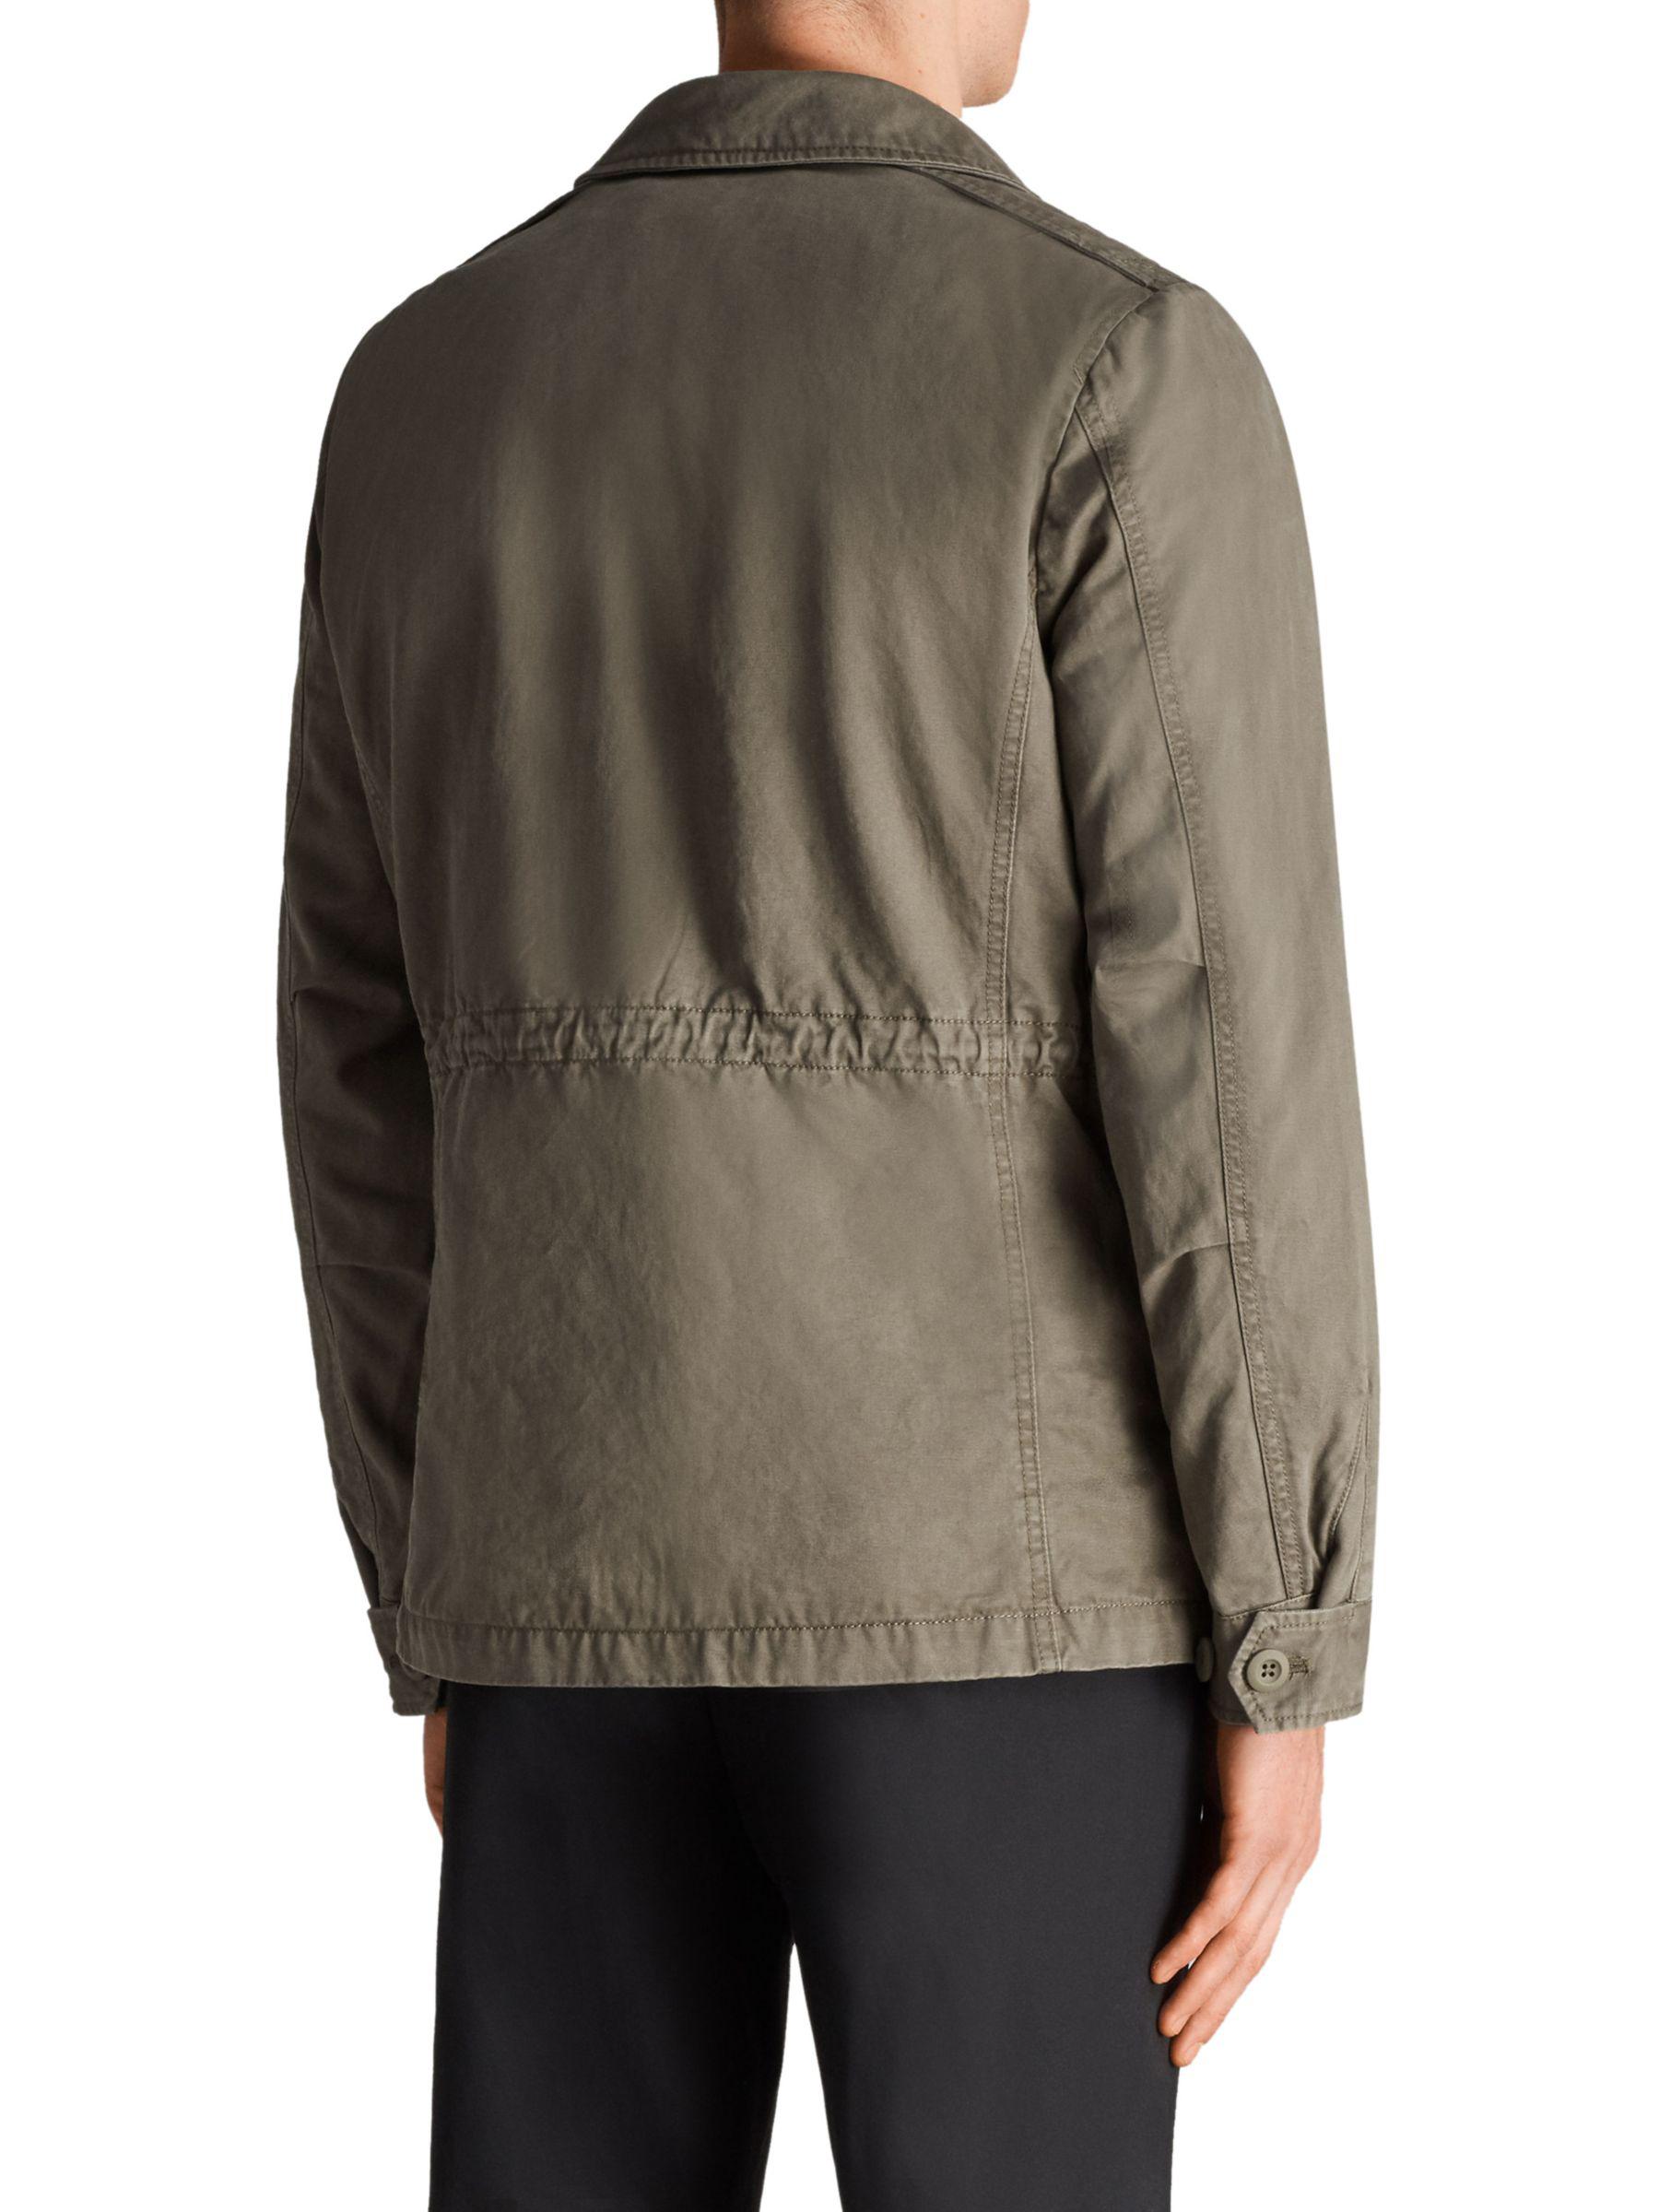 AllSaints Cotton Cote Military Jacket in Dusty Olive (Green) for Men - Lyst